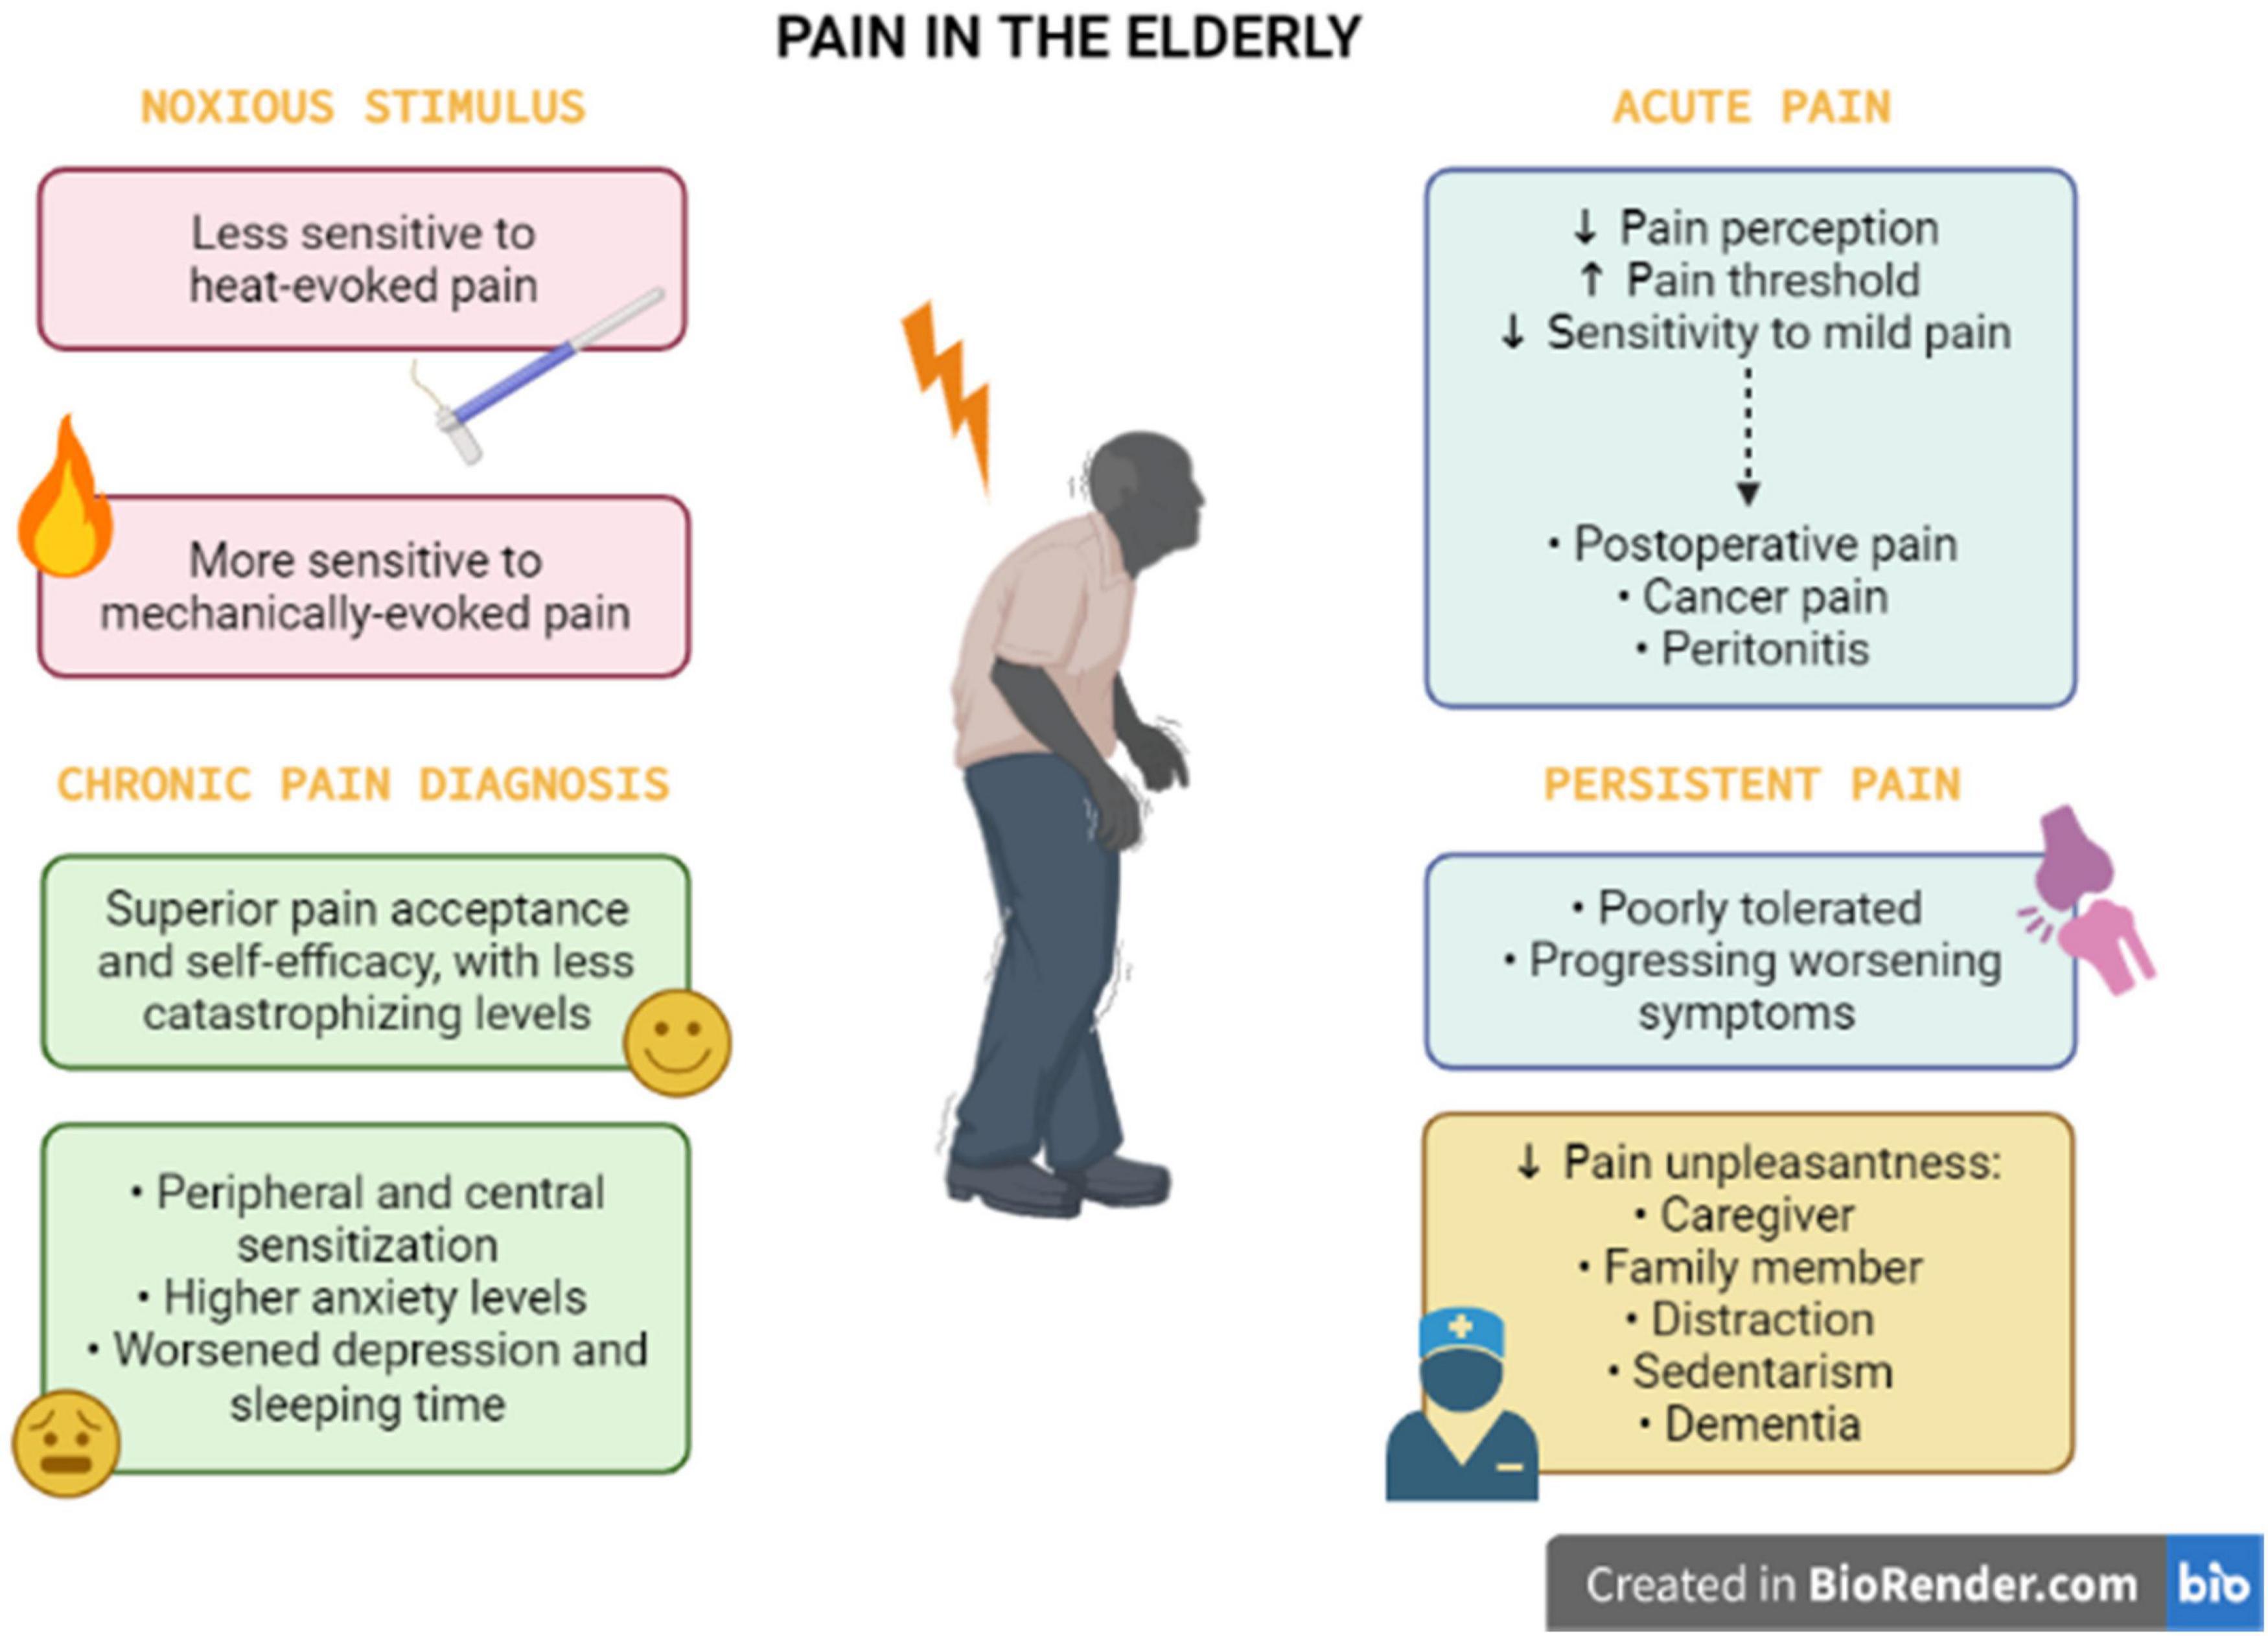 levels of pain